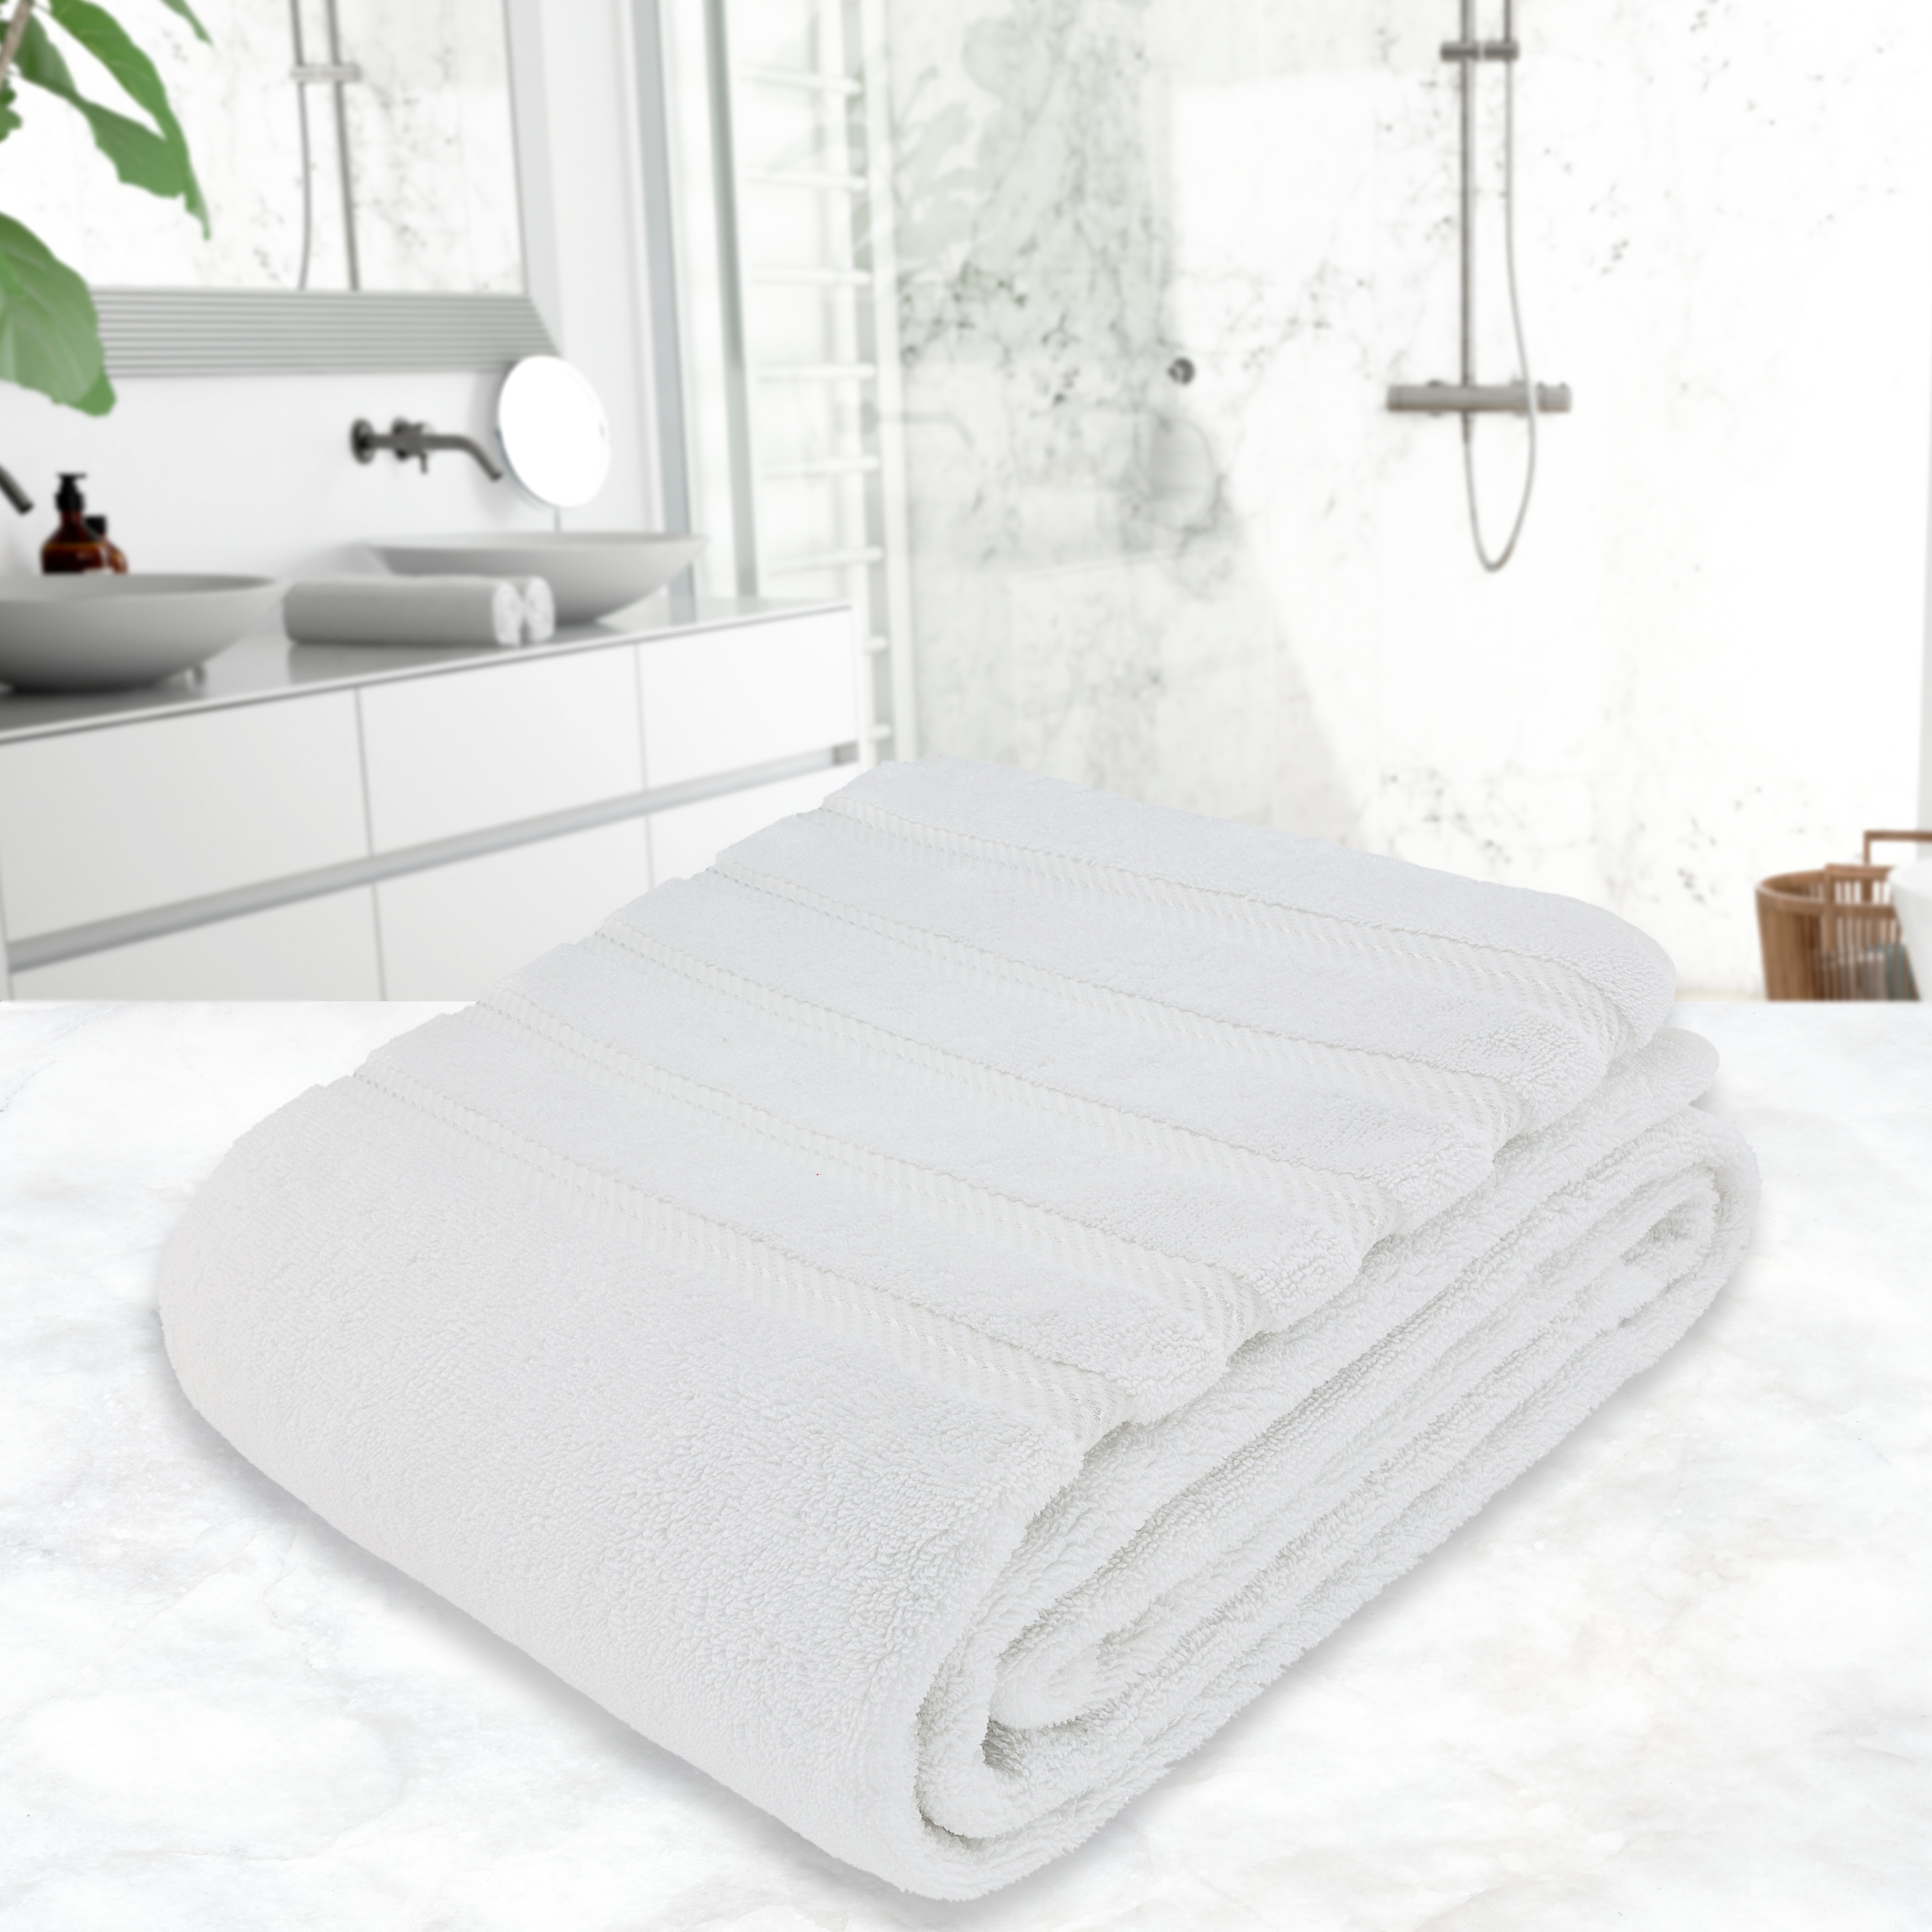 American Soft Linen 40x80 Inches Premium Soft & Luxury 100% Ringspun Genuine Cotton 650 GSM Extra Large Jumbo Turkish Bath Towel for Maximum Softness & Absorbent Sand Taupe Worth $64.99